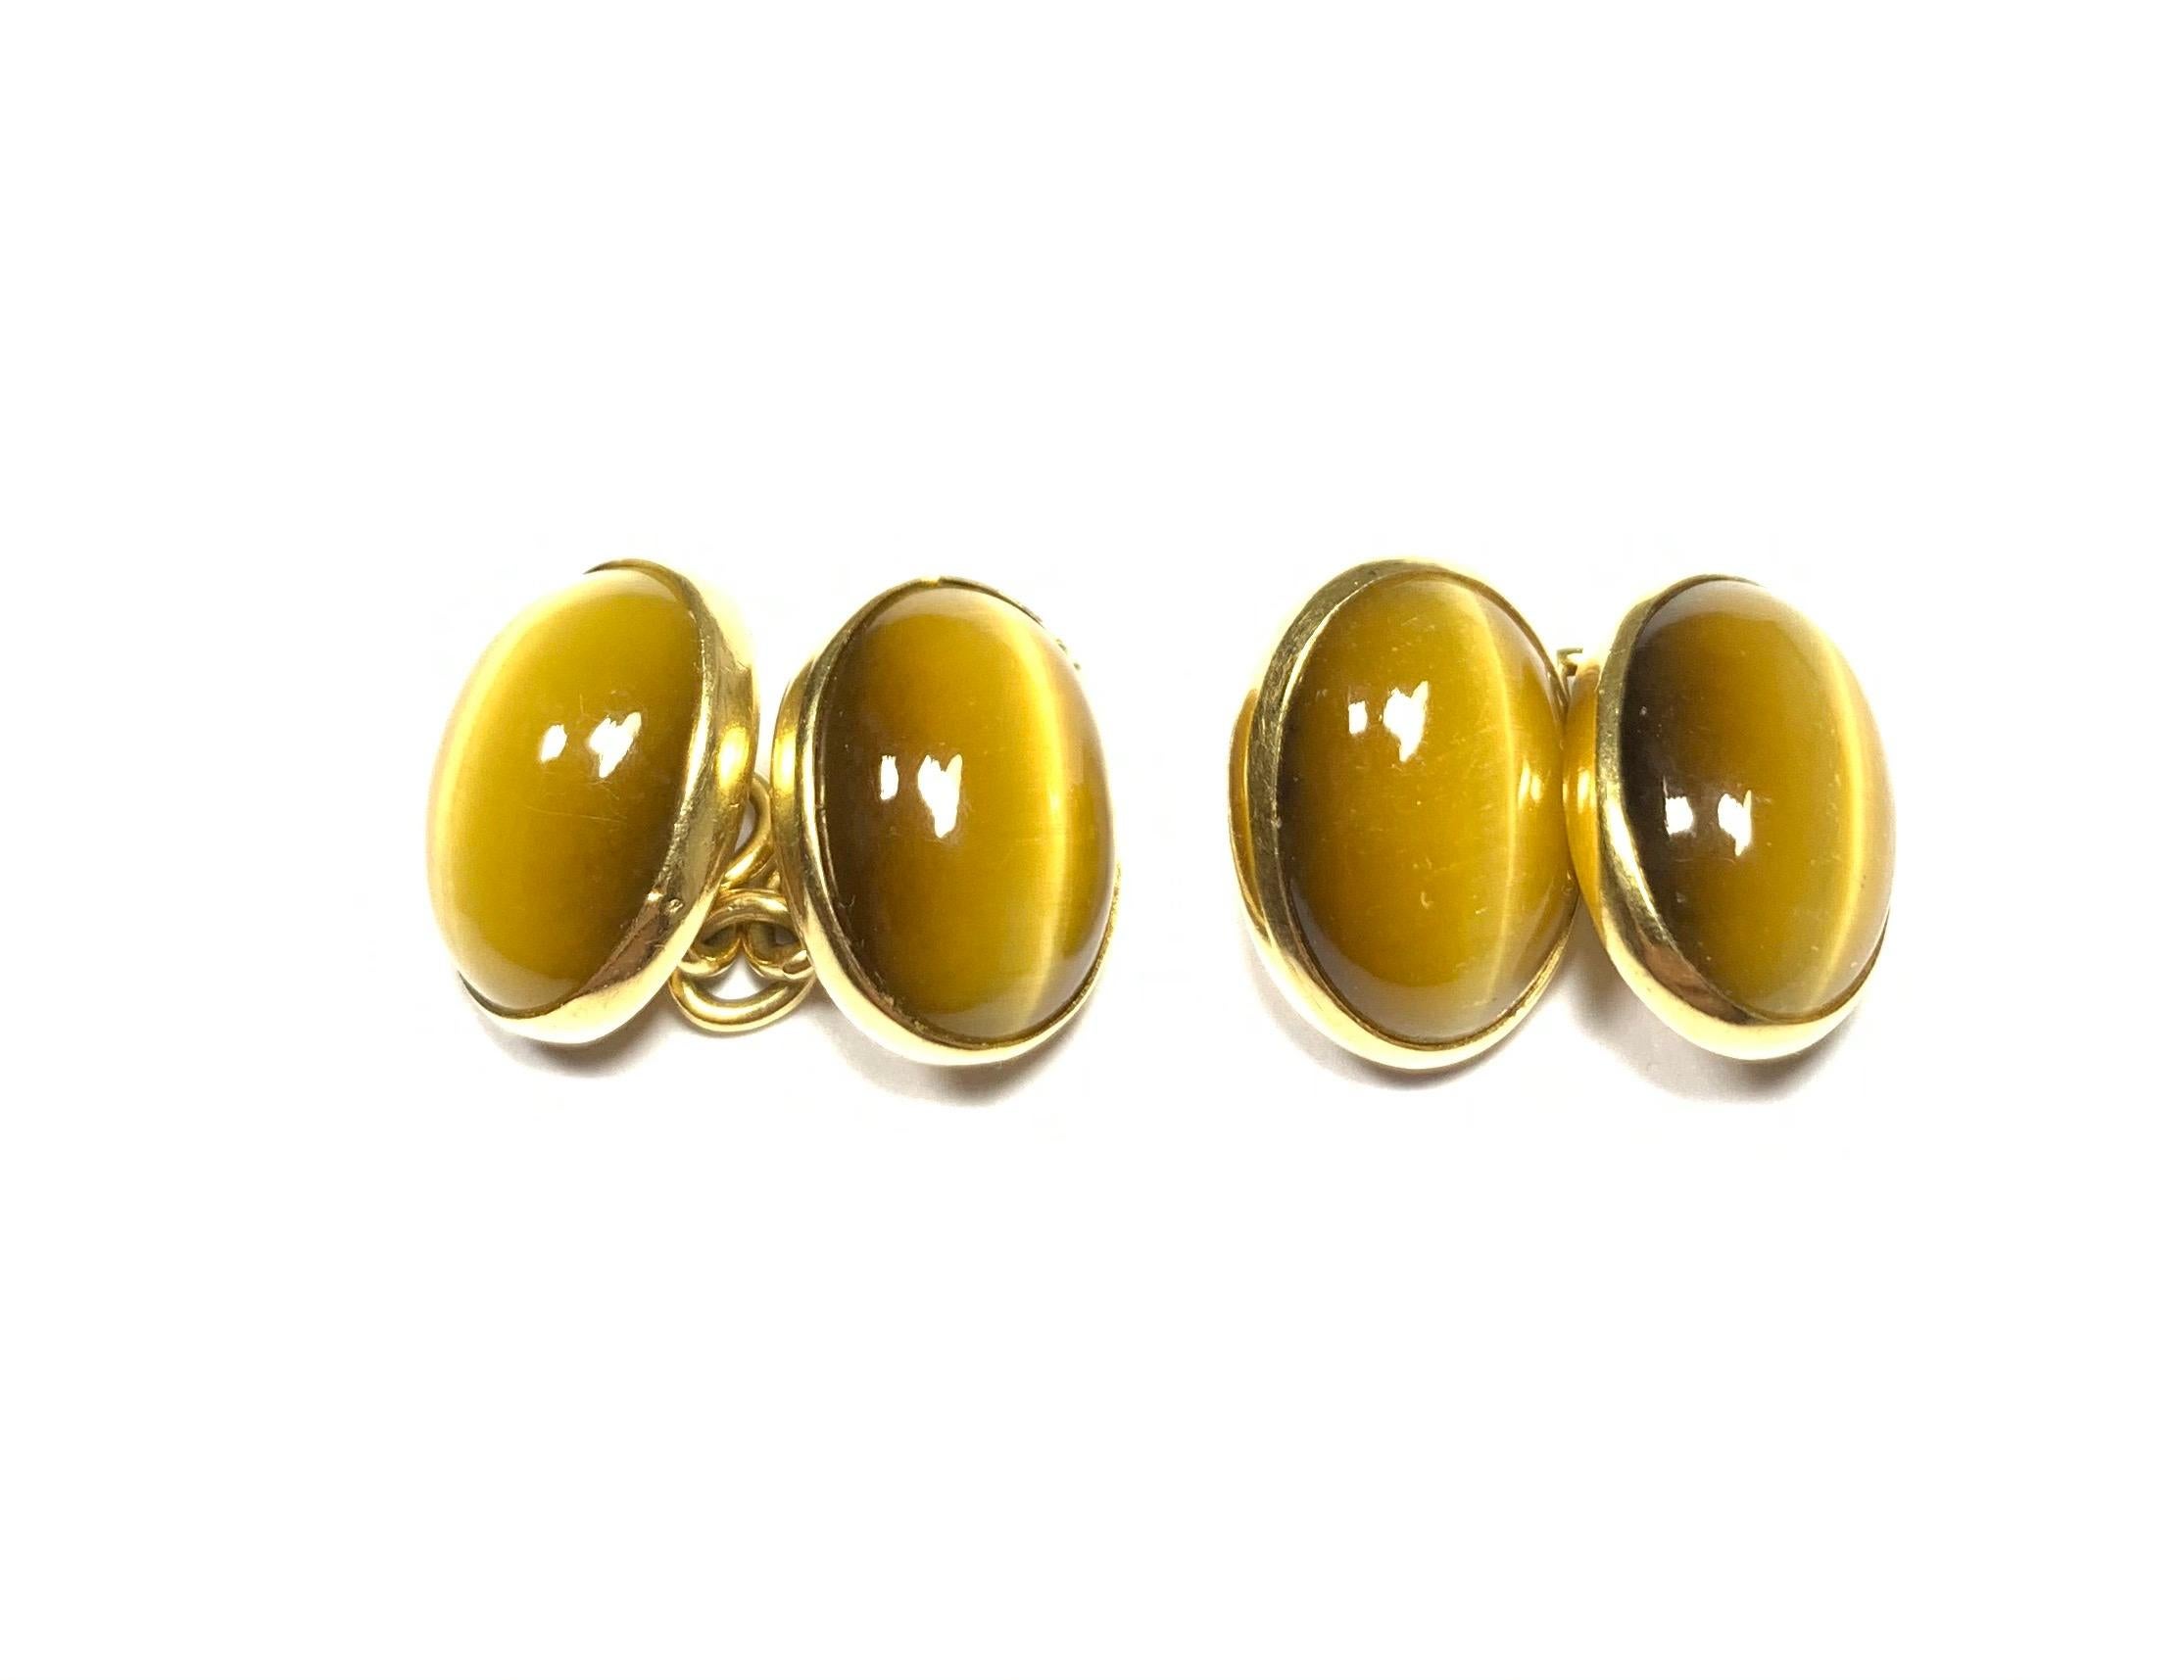 Retro 1960s Golden Cabochon Tiger's Eye Cufflinks, Mounted in 18 Carat Yellow Gold For Sale